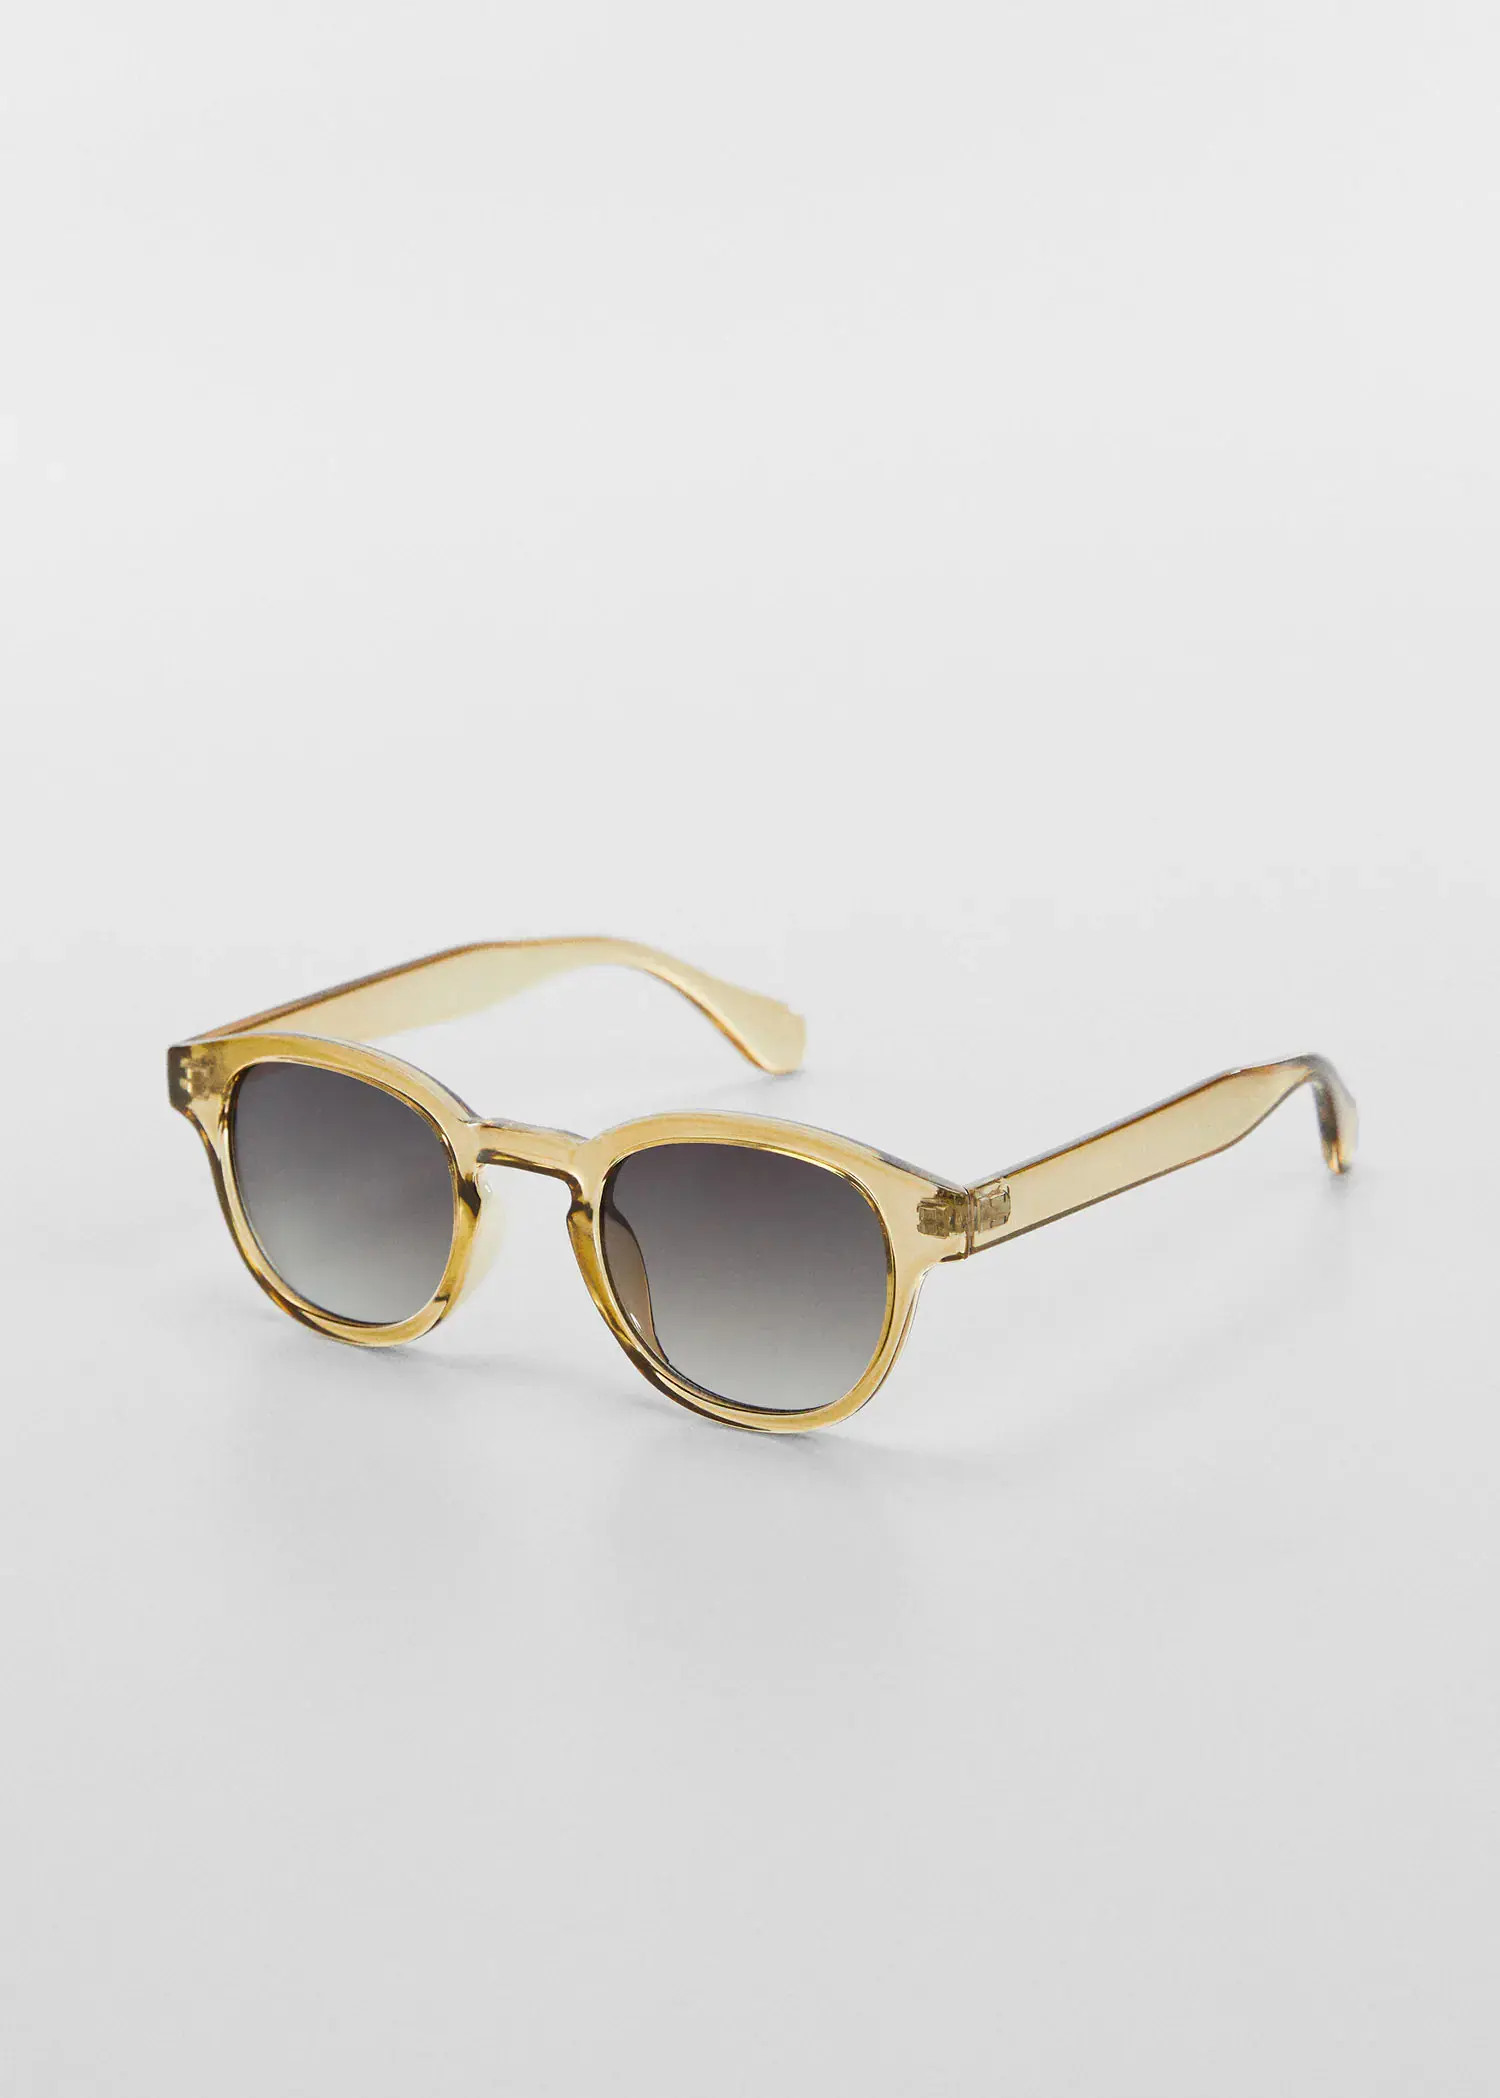 Mango Rounded sunglasses. a pair of sunglasses sitting on top of a white table. 